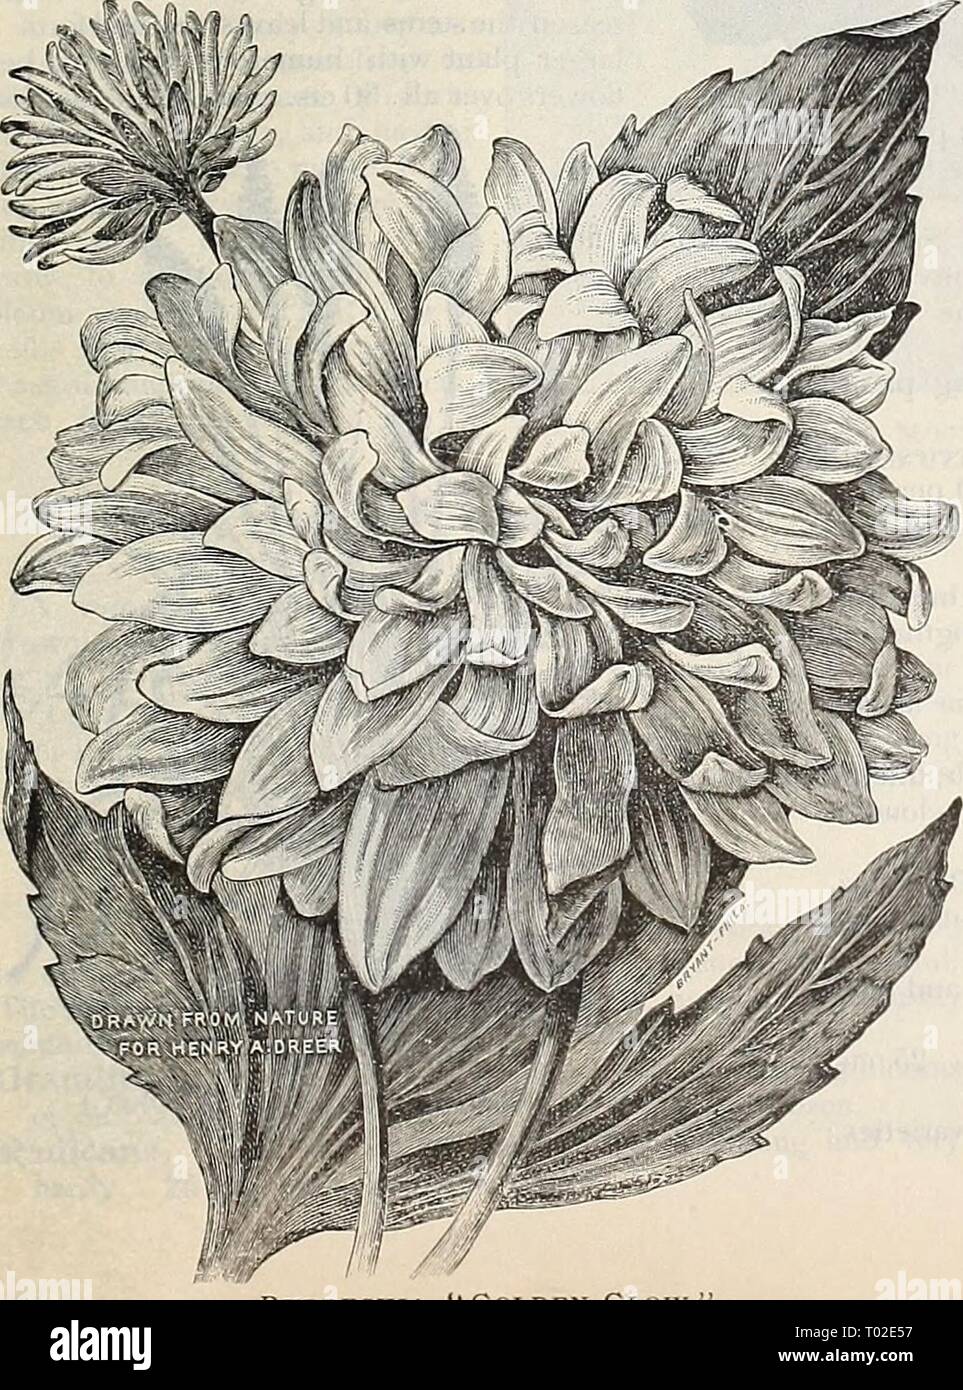 Dreer's garden calendar : 1899 . dreersgardencale1899henr Year: 1899  Platycodon Japokicu- Fl. Pi.. harbinger of Spring l.vtu    Primula Cortusoides Sieboldii. A pretty Japanese species with large rose or lavender-colored flowers, pro- duced in denseheads, 10 inches high. 15 cts. each ; $1.50 per doz. Pyrethrum Hybridum Fl. PI. Too much cannot be said in favor of this grand hardy perennial. No class of plants gives a wider range of colors, while the form and substance of the flowers is all that could be wished ; their main season of bloom- ing is in' June, but if the old flower stems are remov Stock Photo